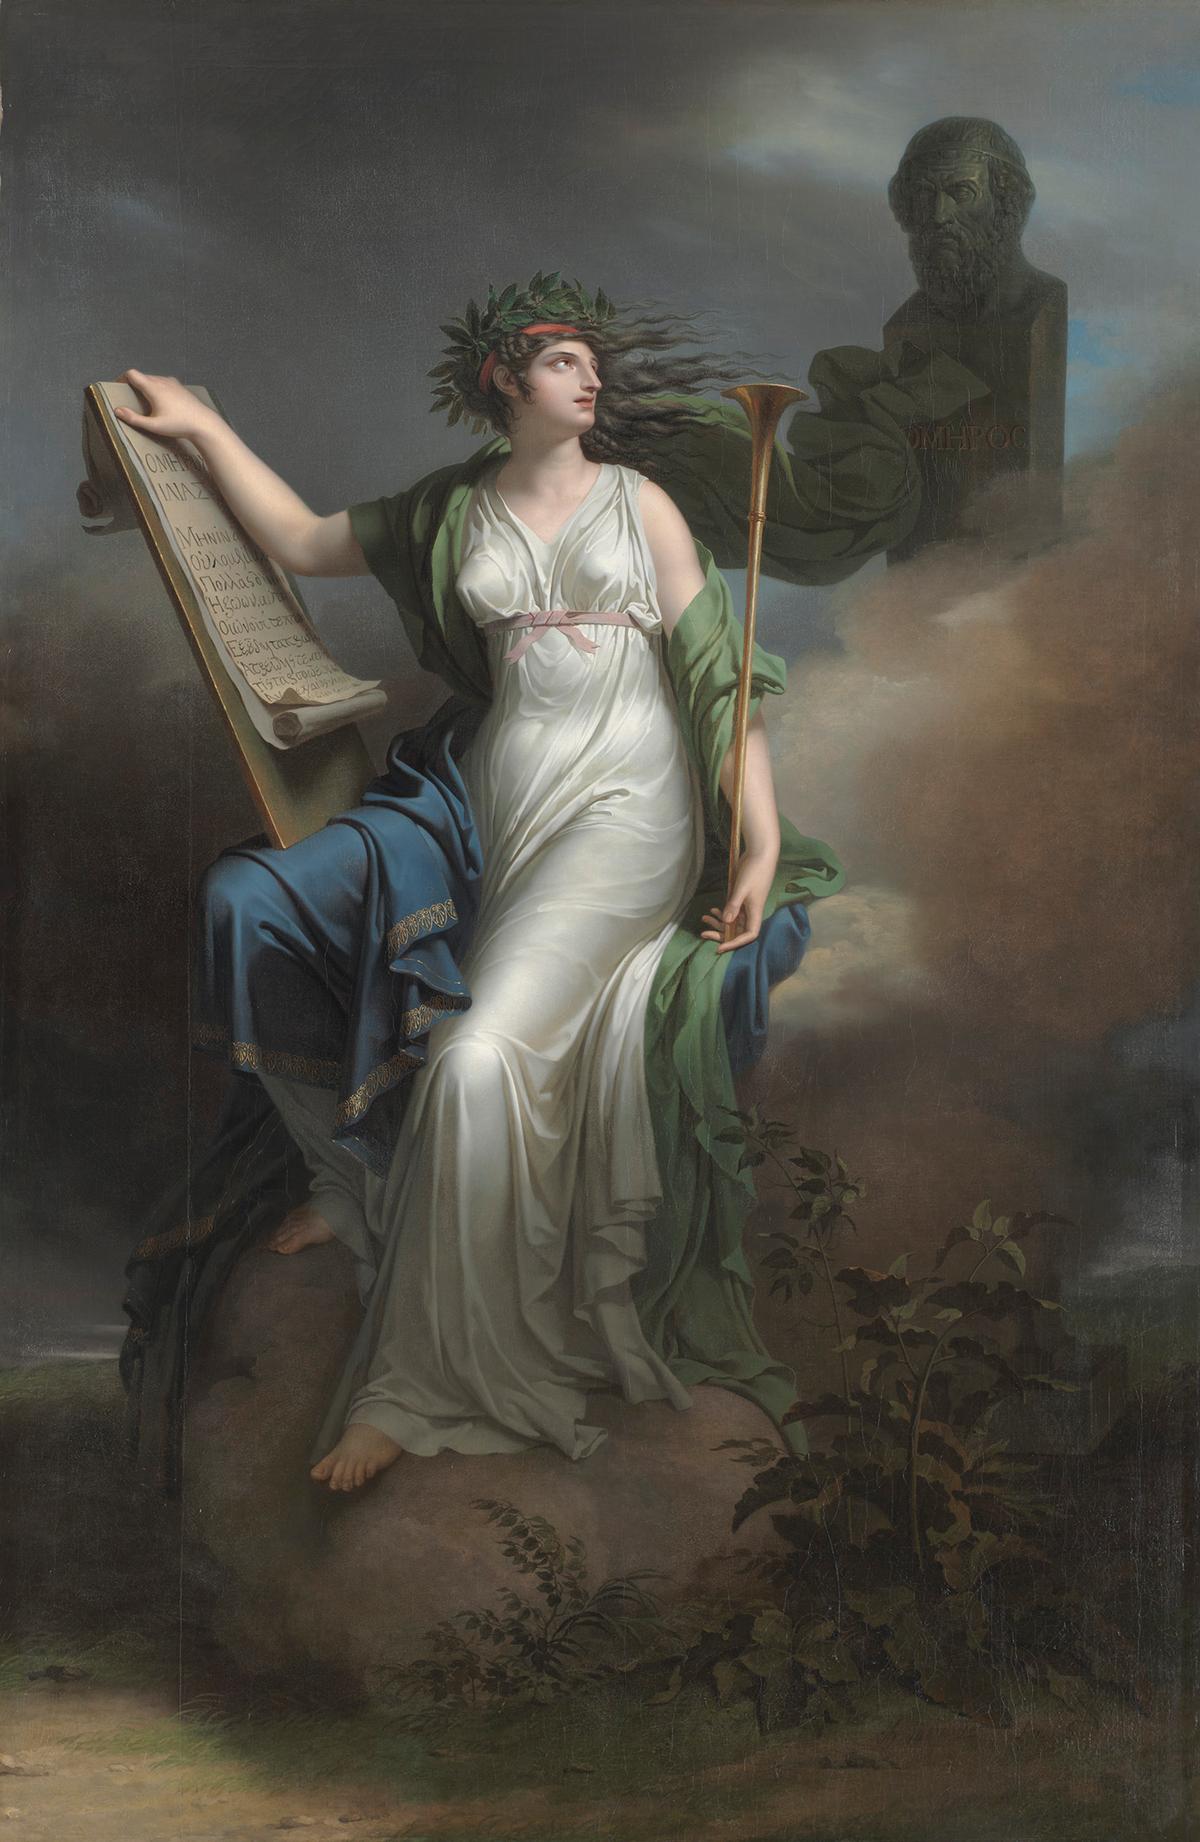 The Muse, or divine inspiration, is dismissed when poetry is reduced to "a little word machine." "Calliope, Muse of Epic Poetry," 1798, by Charles Meynier. Oil on canvas. The Cleveland Museum of Art, Cleveland. (Public Domain)